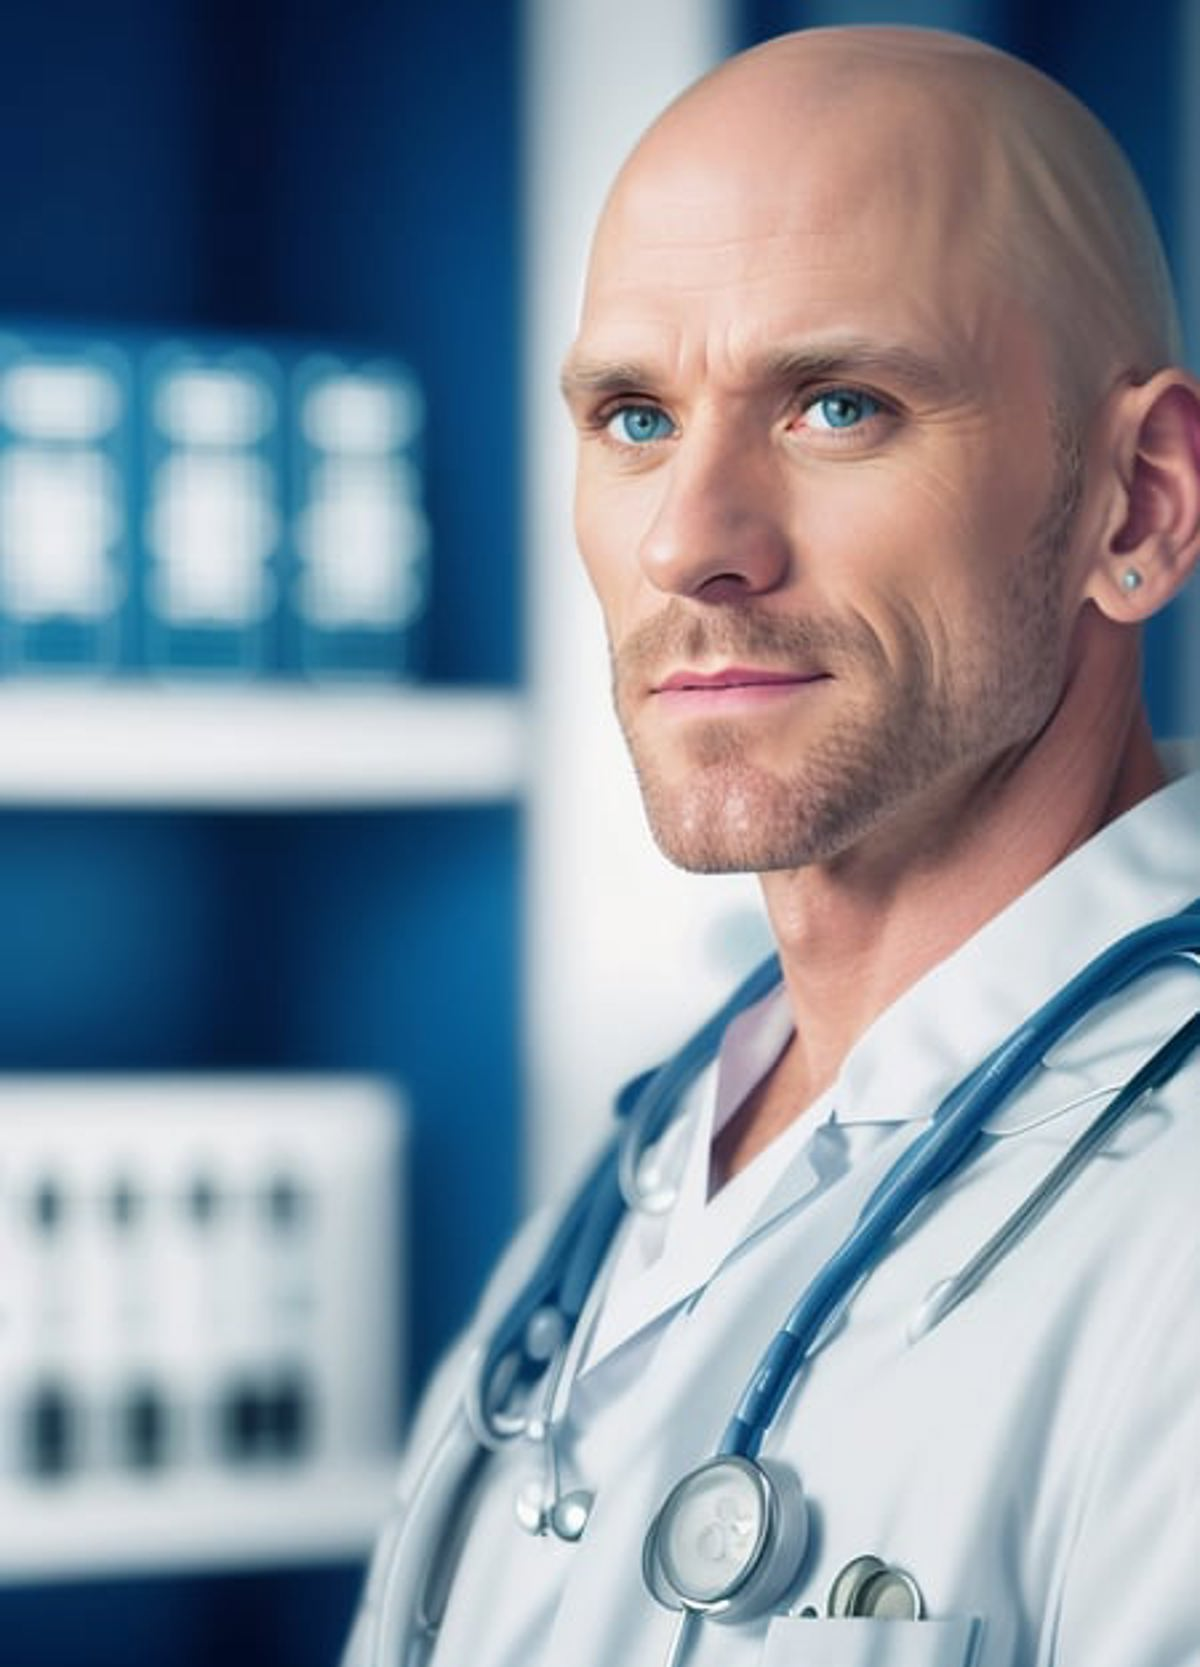 devin mcelroy share johnny sins as a doctor photos